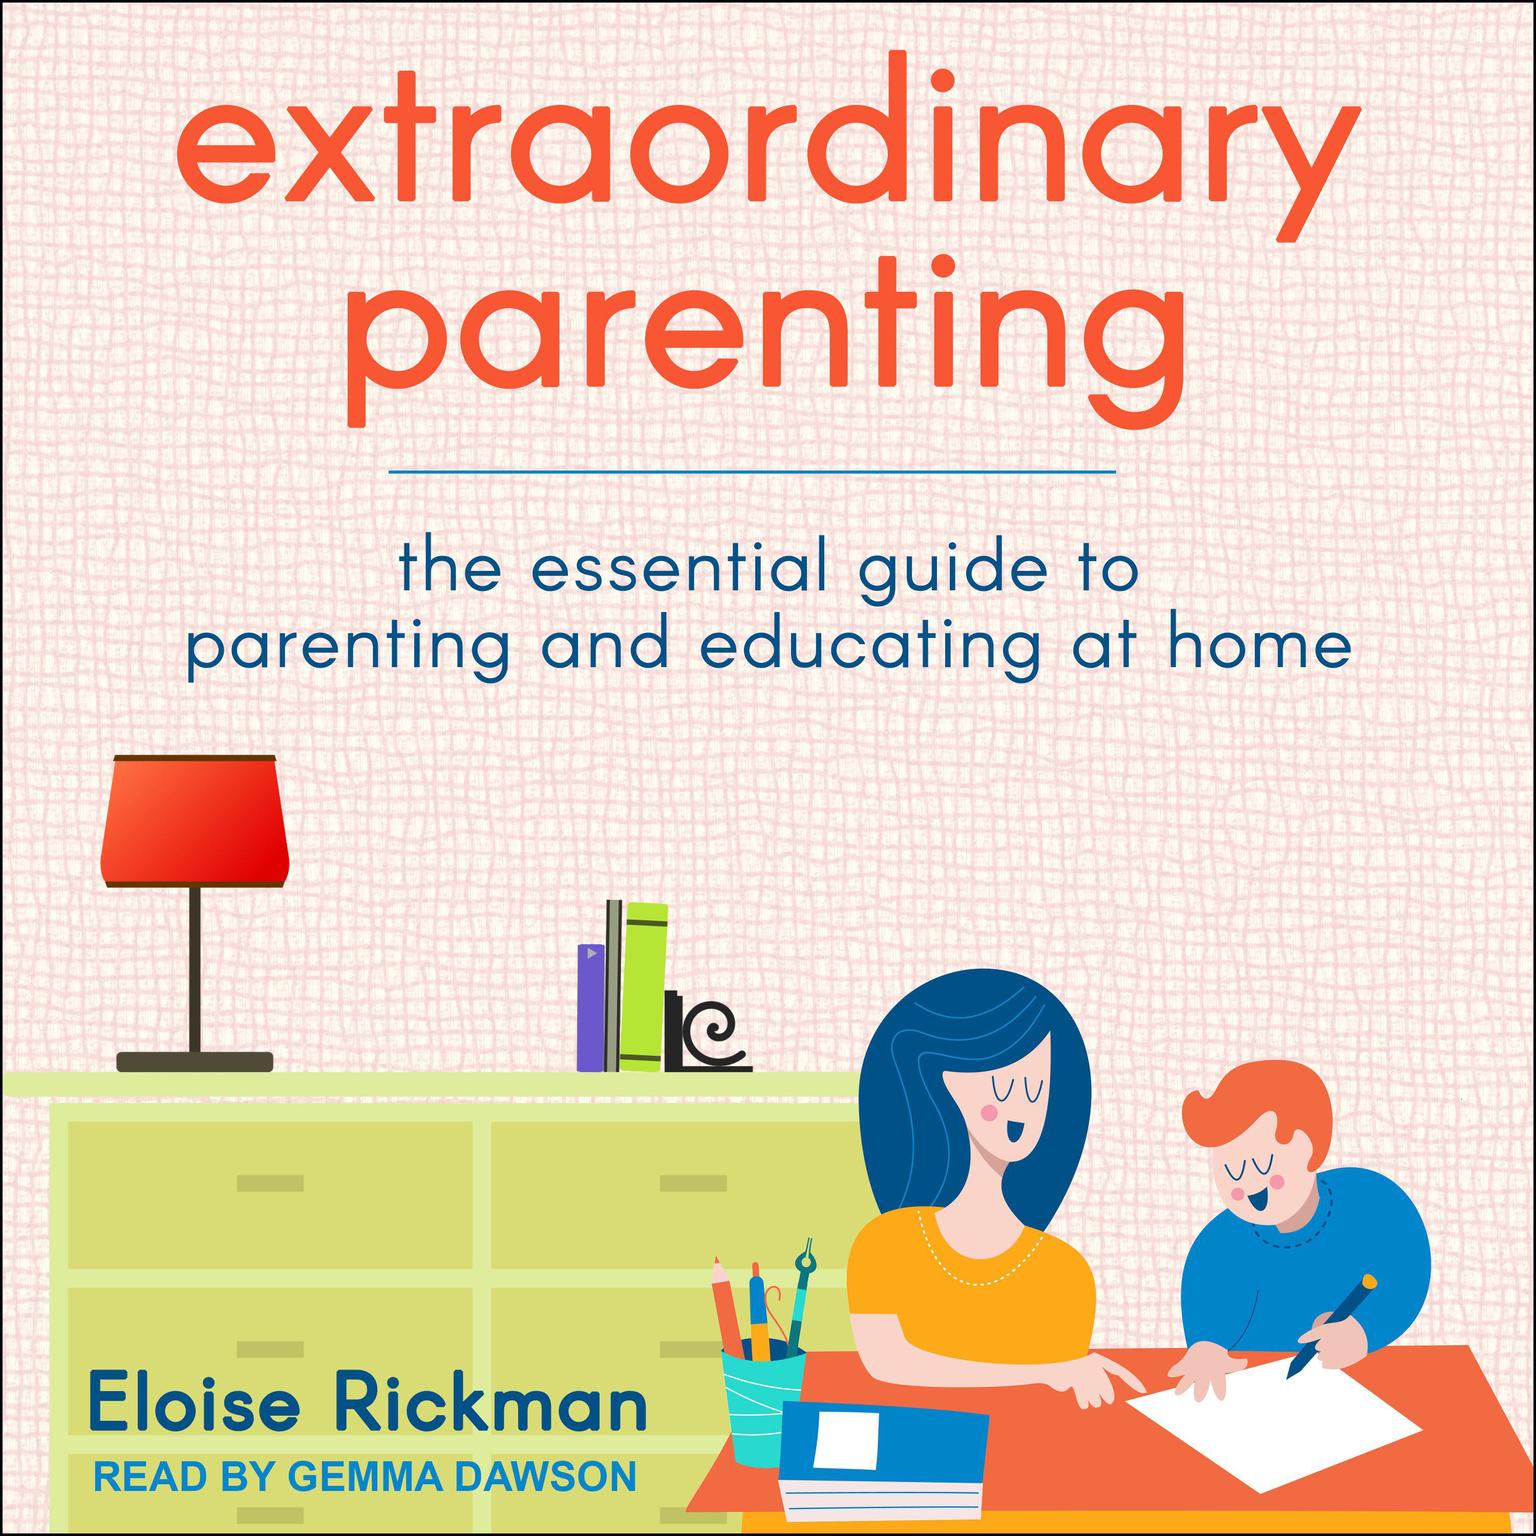 Extraordinary Parenting: The Essential Guide to Parenting and Educating at Home Audiobook, by Eloise Rickman